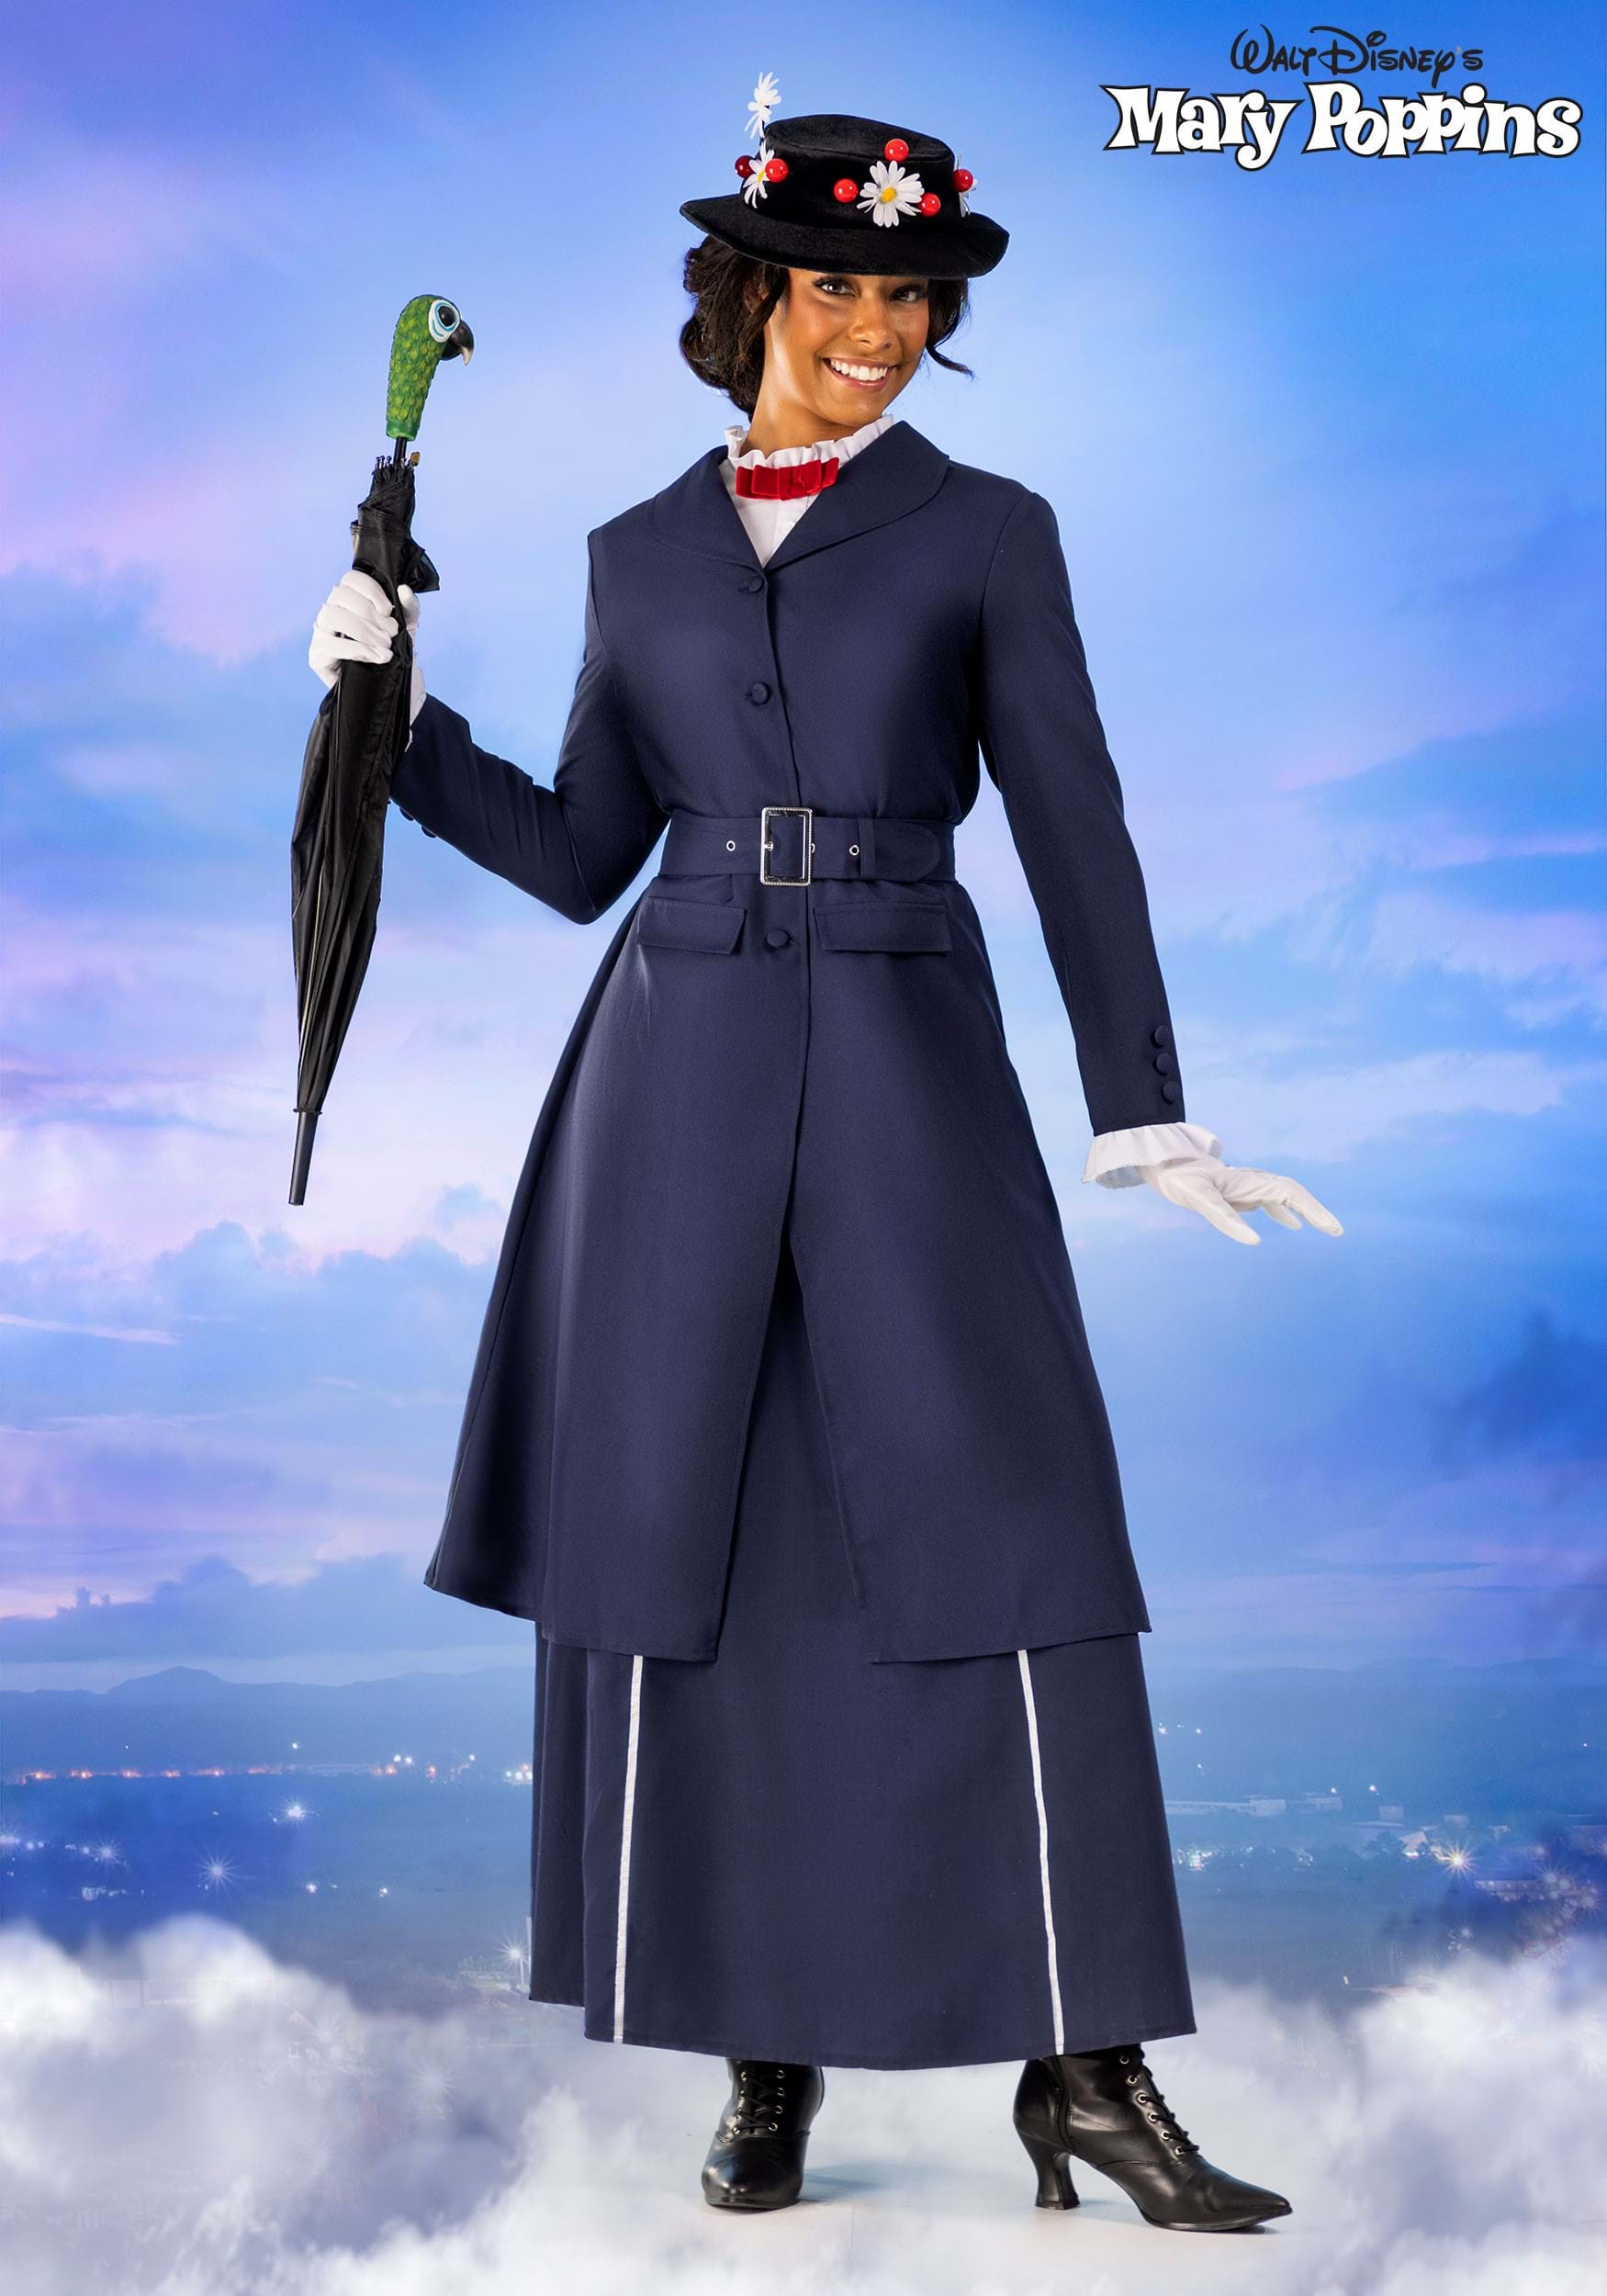 Mary poppins costume